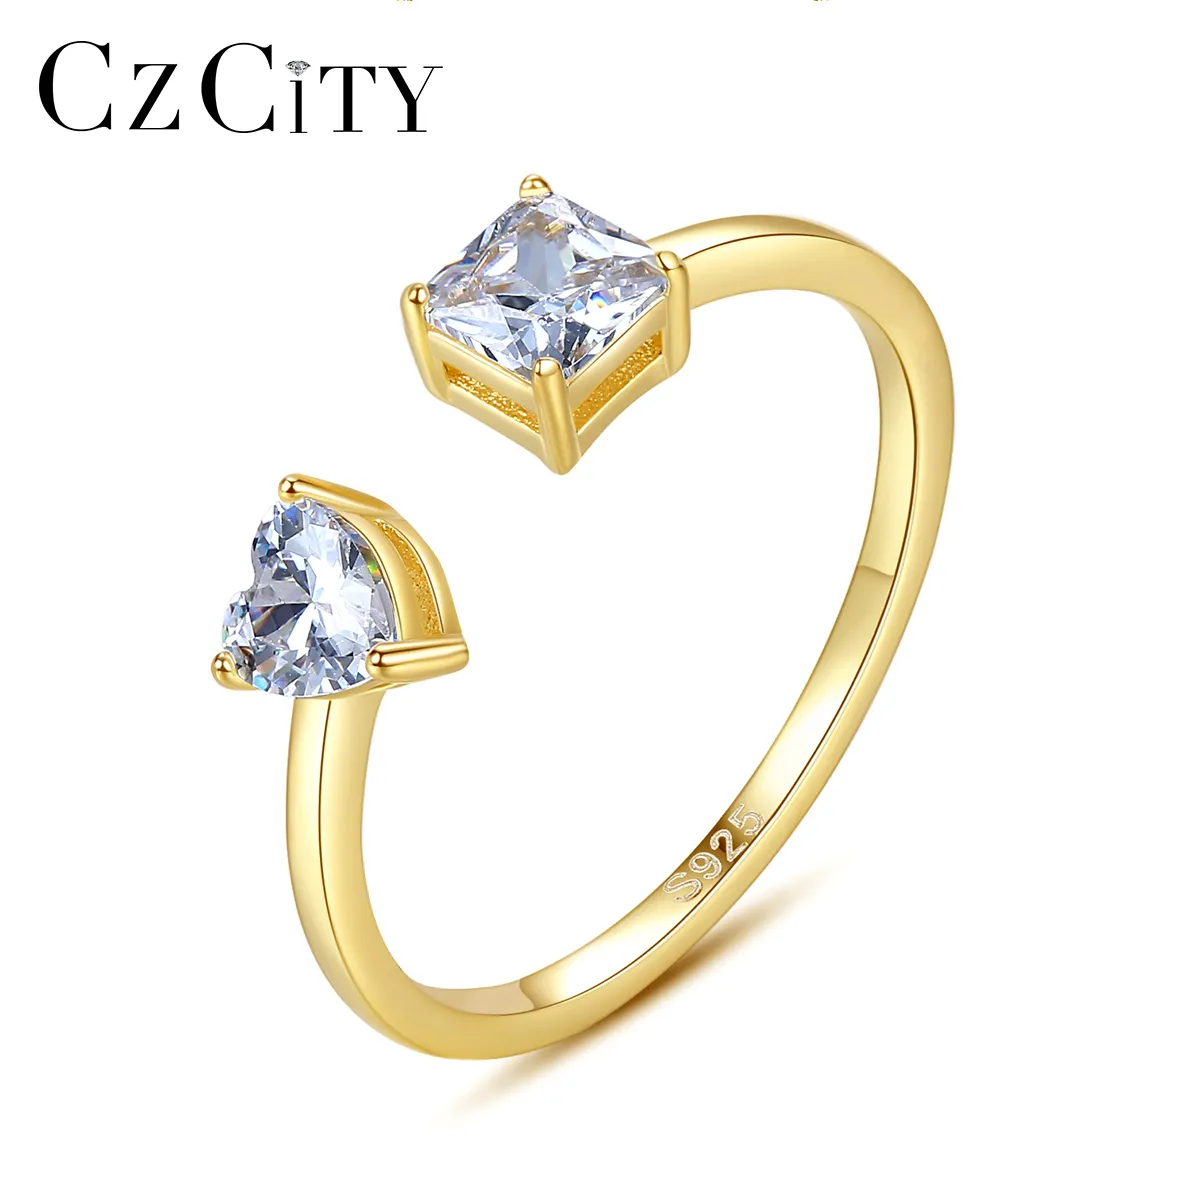 CZCITY Fine Simple Jewelry Gold Plated Heart Zirconia Rings 925 Sterling Silver Engagement Band Adjustable Open Ring For Girls